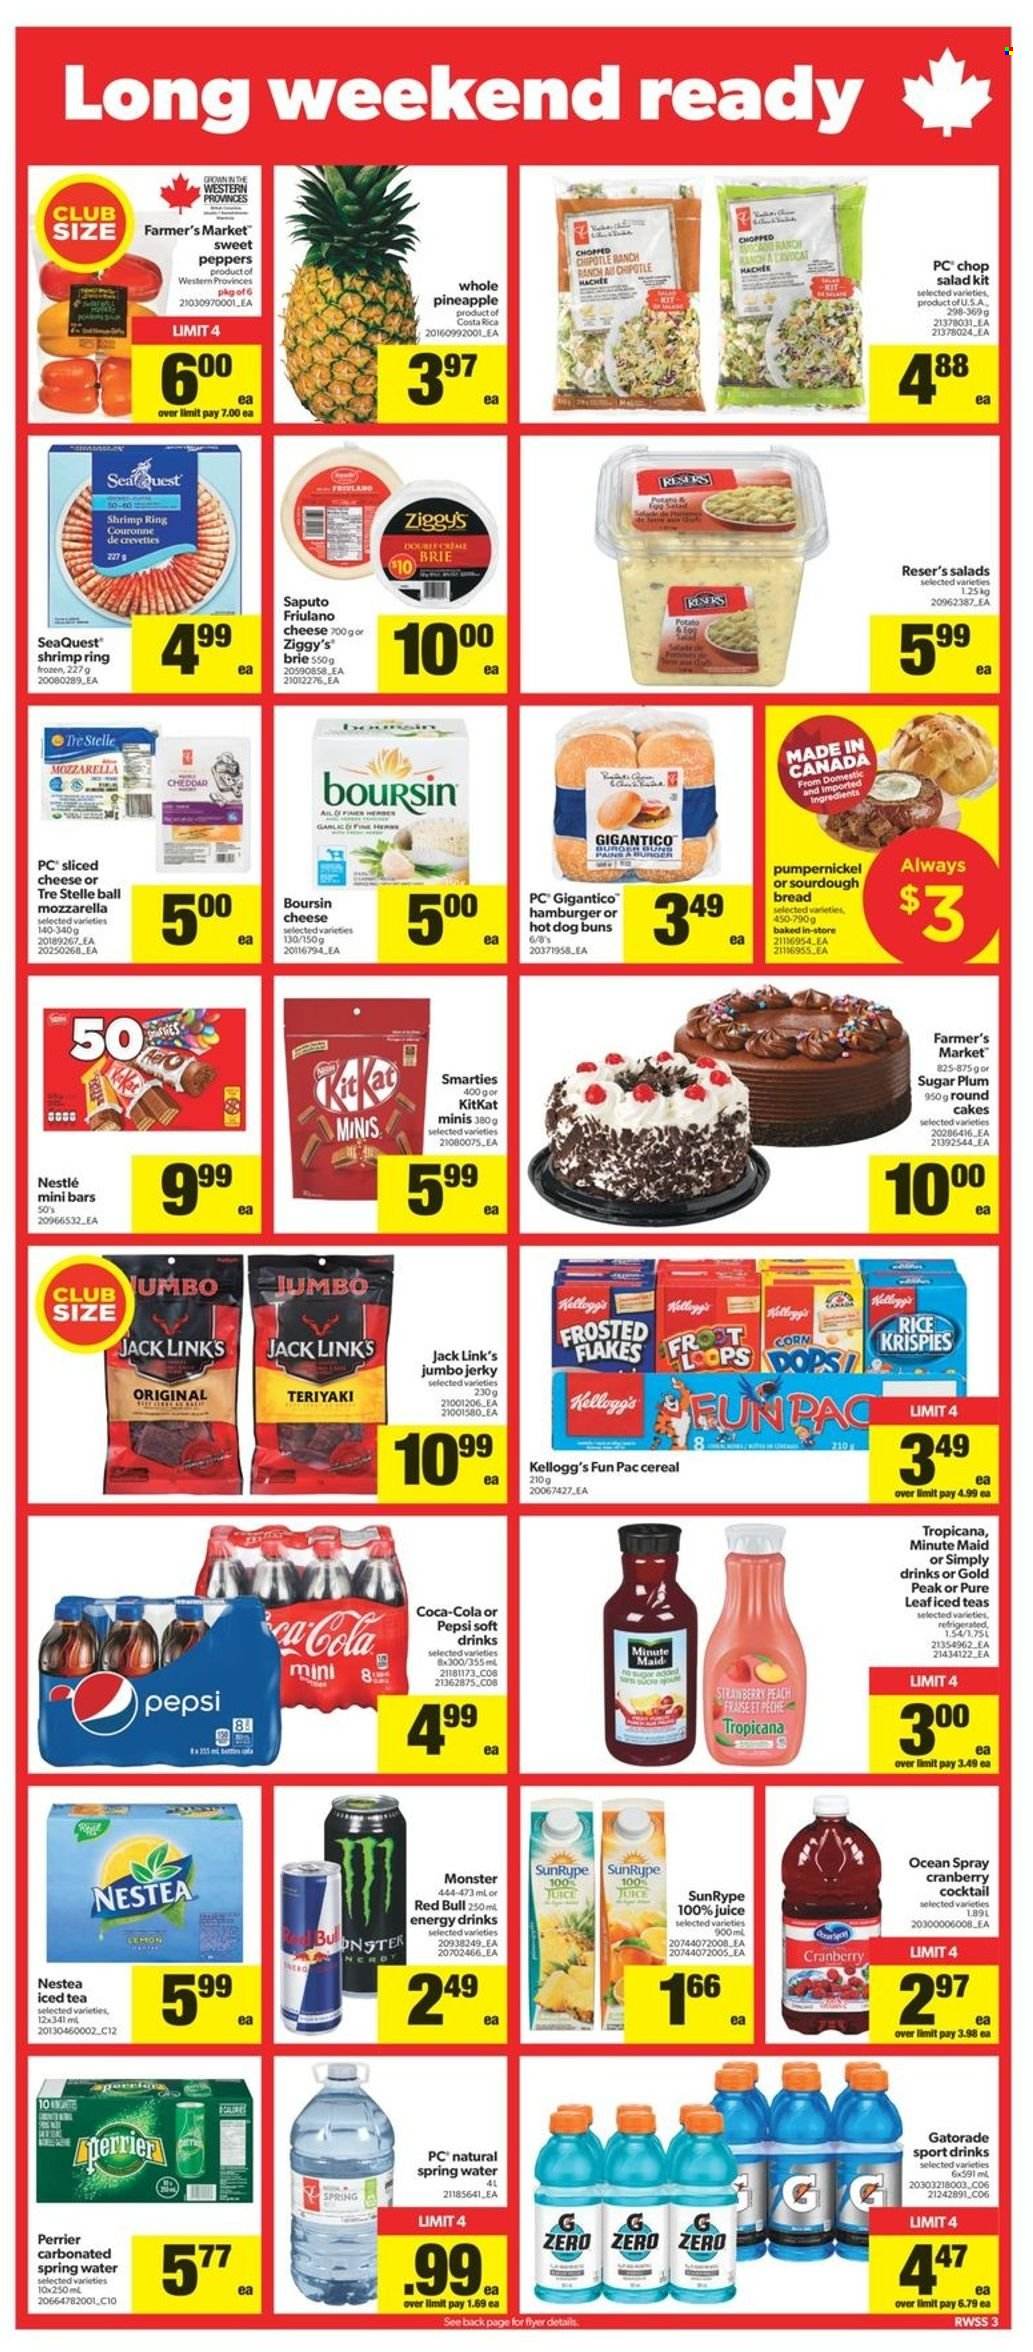 thumbnail - Real Canadian Superstore Flyer - June 30, 2022 - July 06, 2022 - Sales products - cake, buns, sourdough bread, corn, garlic, sweet peppers, pineapple, shrimps, jerky, sliced cheese, cheddar, brie, KitKat, Kellogg's, Jack Link's, sugar, cereals, Rice Krispies, Frosted Flakes, Coca-Cola, Pepsi, juice, energy drink, Monster, ice tea, soft drink, Red Bull, Perrier, Gatorade, fruit punch, spring water, Pure Leaf, mozzarella, Nestlé, Smarties. Page 3.